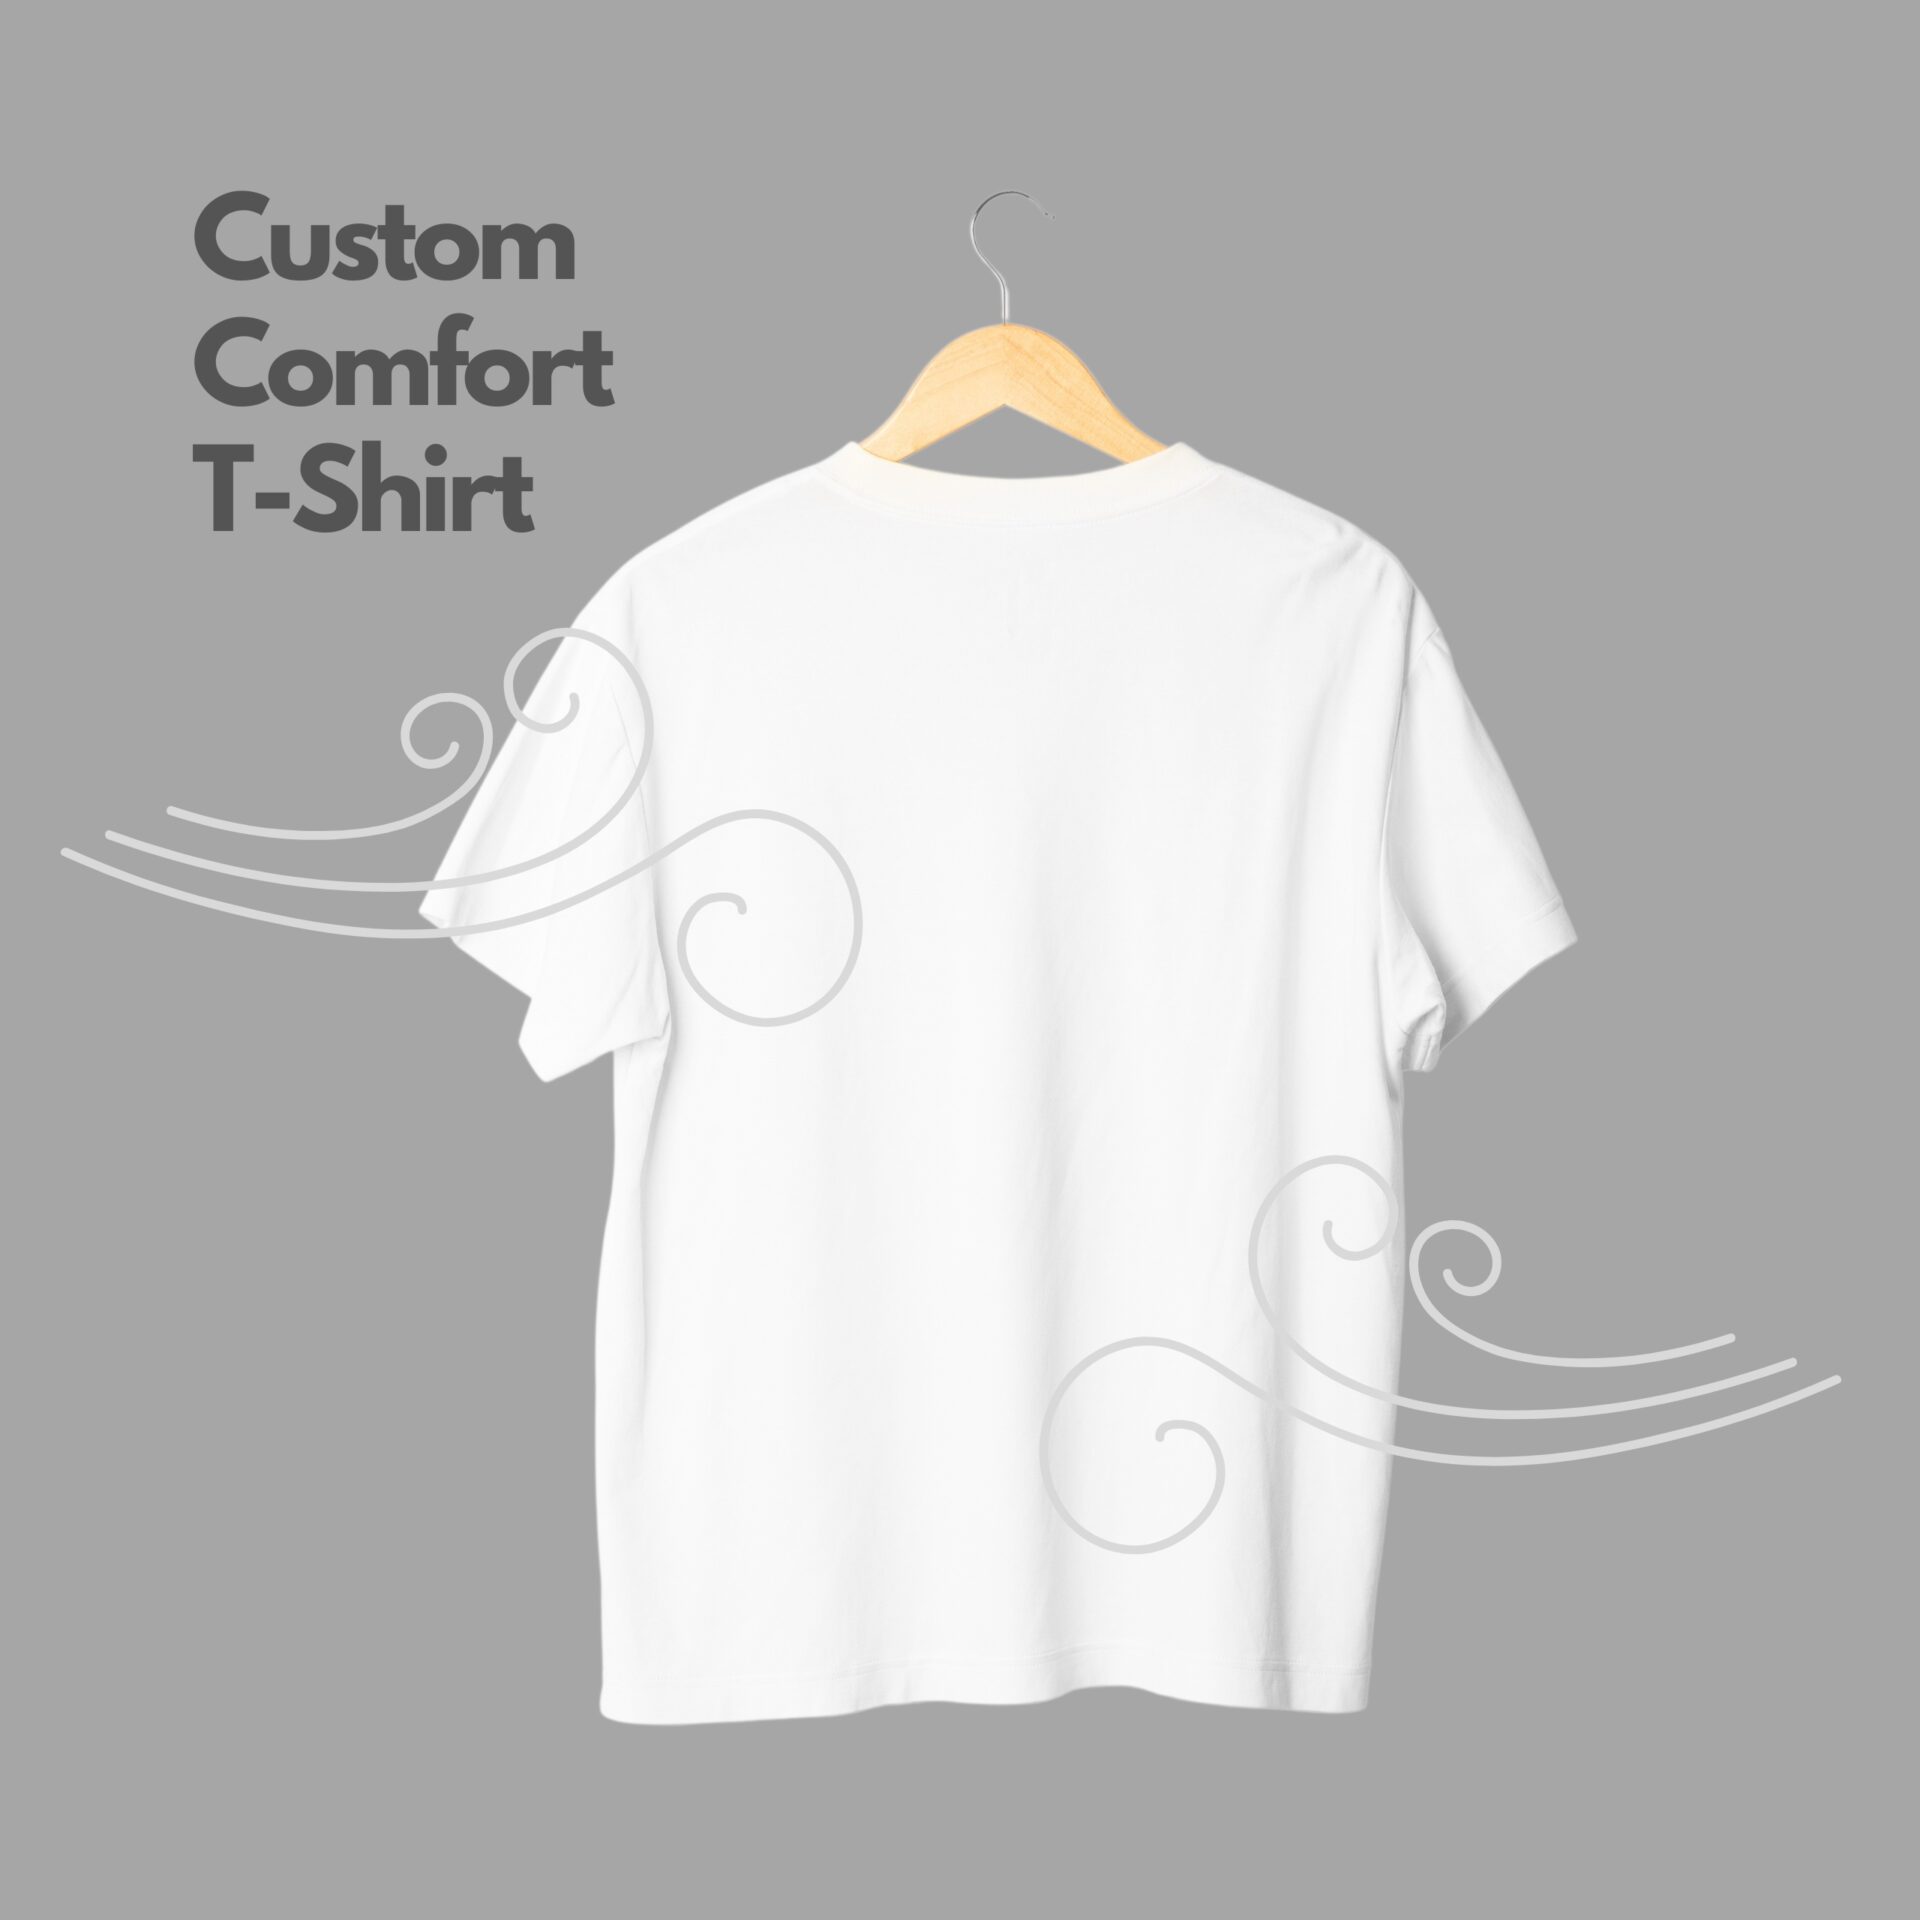 corporate gifts singapore customer printed T-shirts